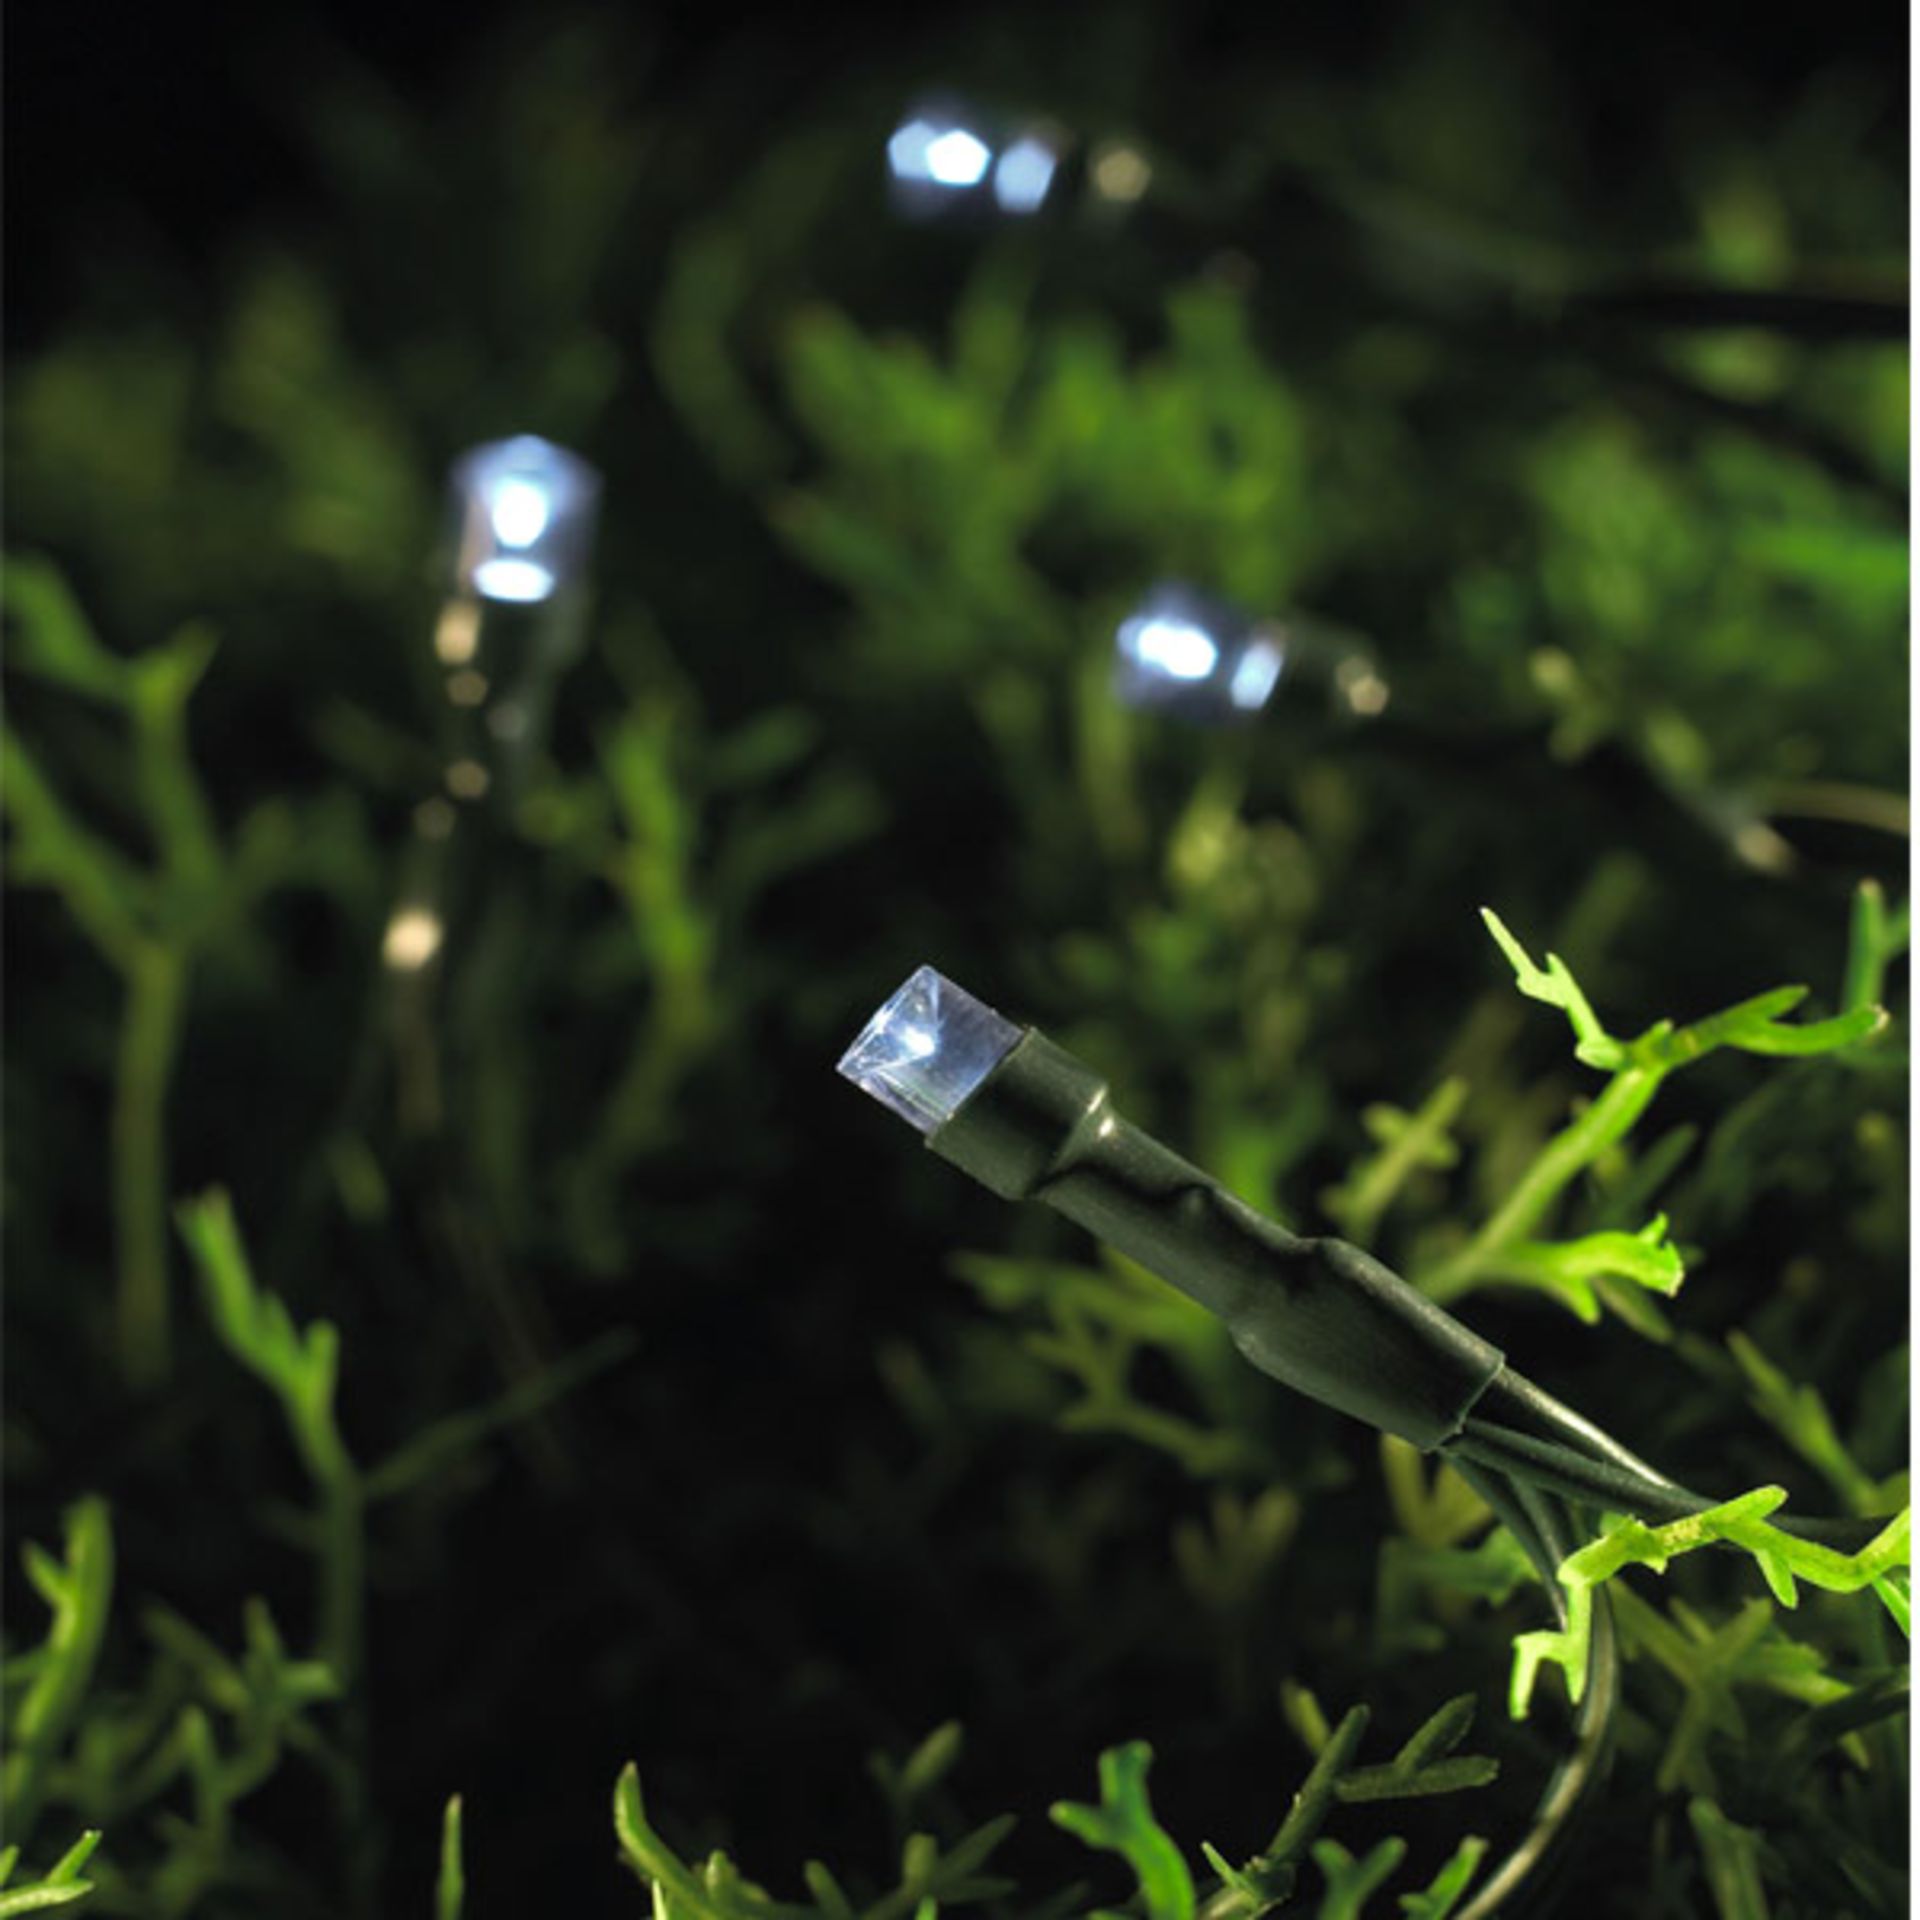 V Brand New Set Of 50 Solar Powered String Lights - Come on At Dusk & Off At Dawn X 2 YOUR BID PRICE - Image 2 of 2